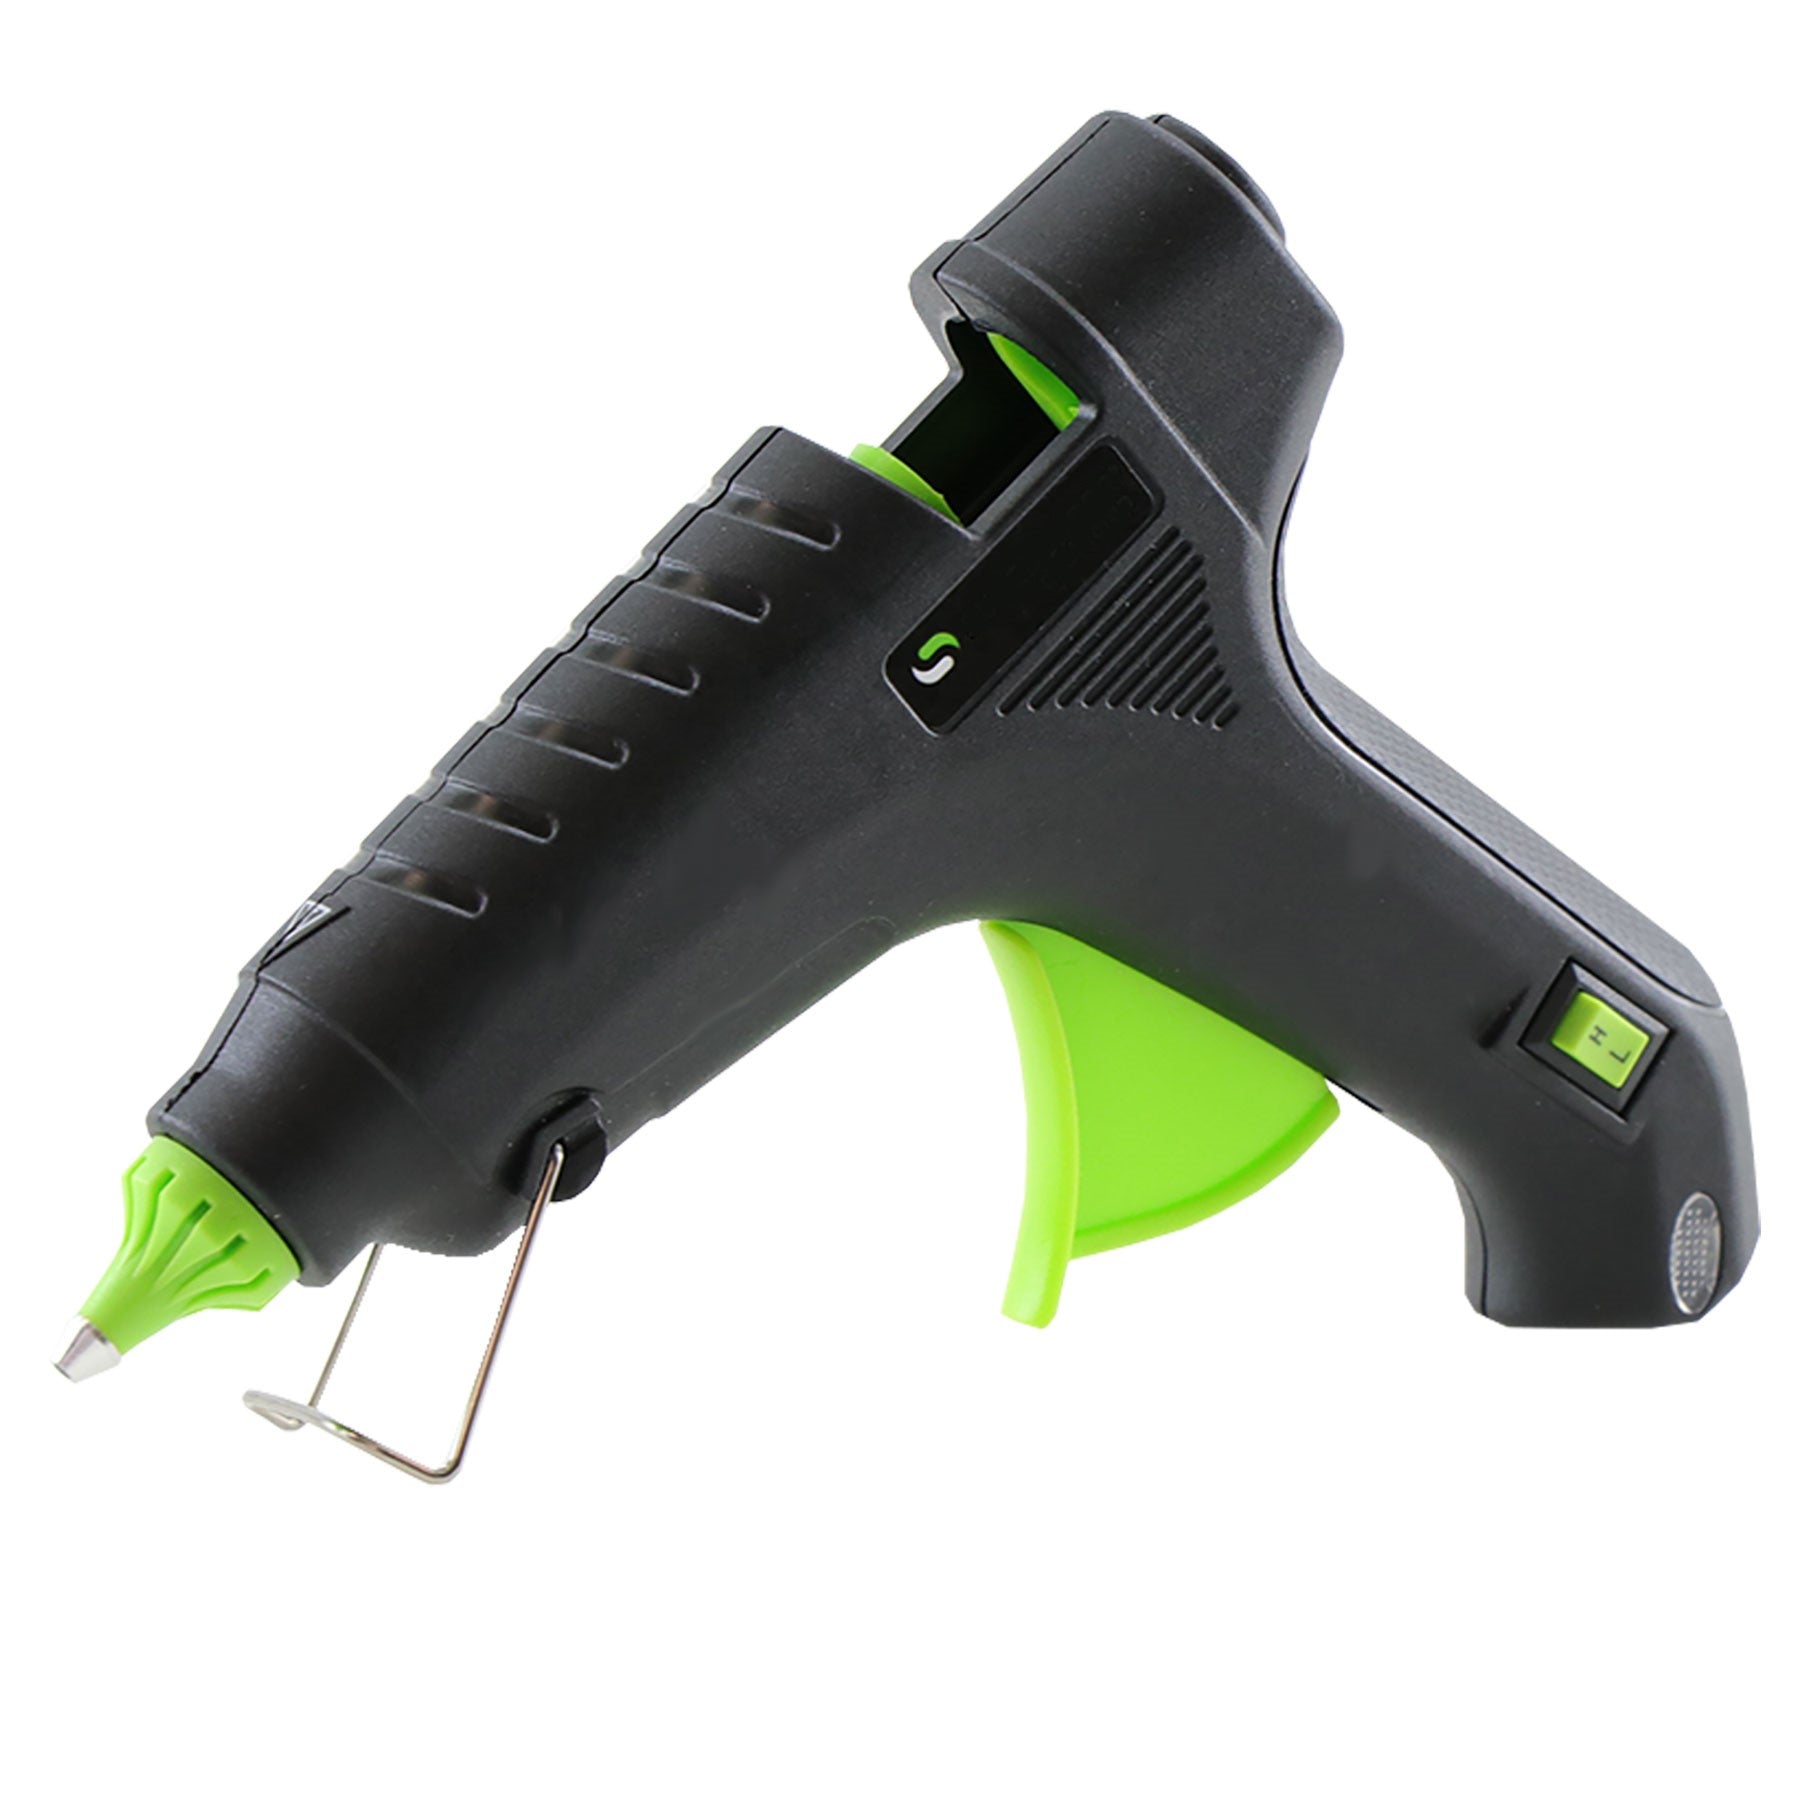 Light Duty 40 Watt Full Size Glue Guns: Available in High, Low and Dual Temperature.